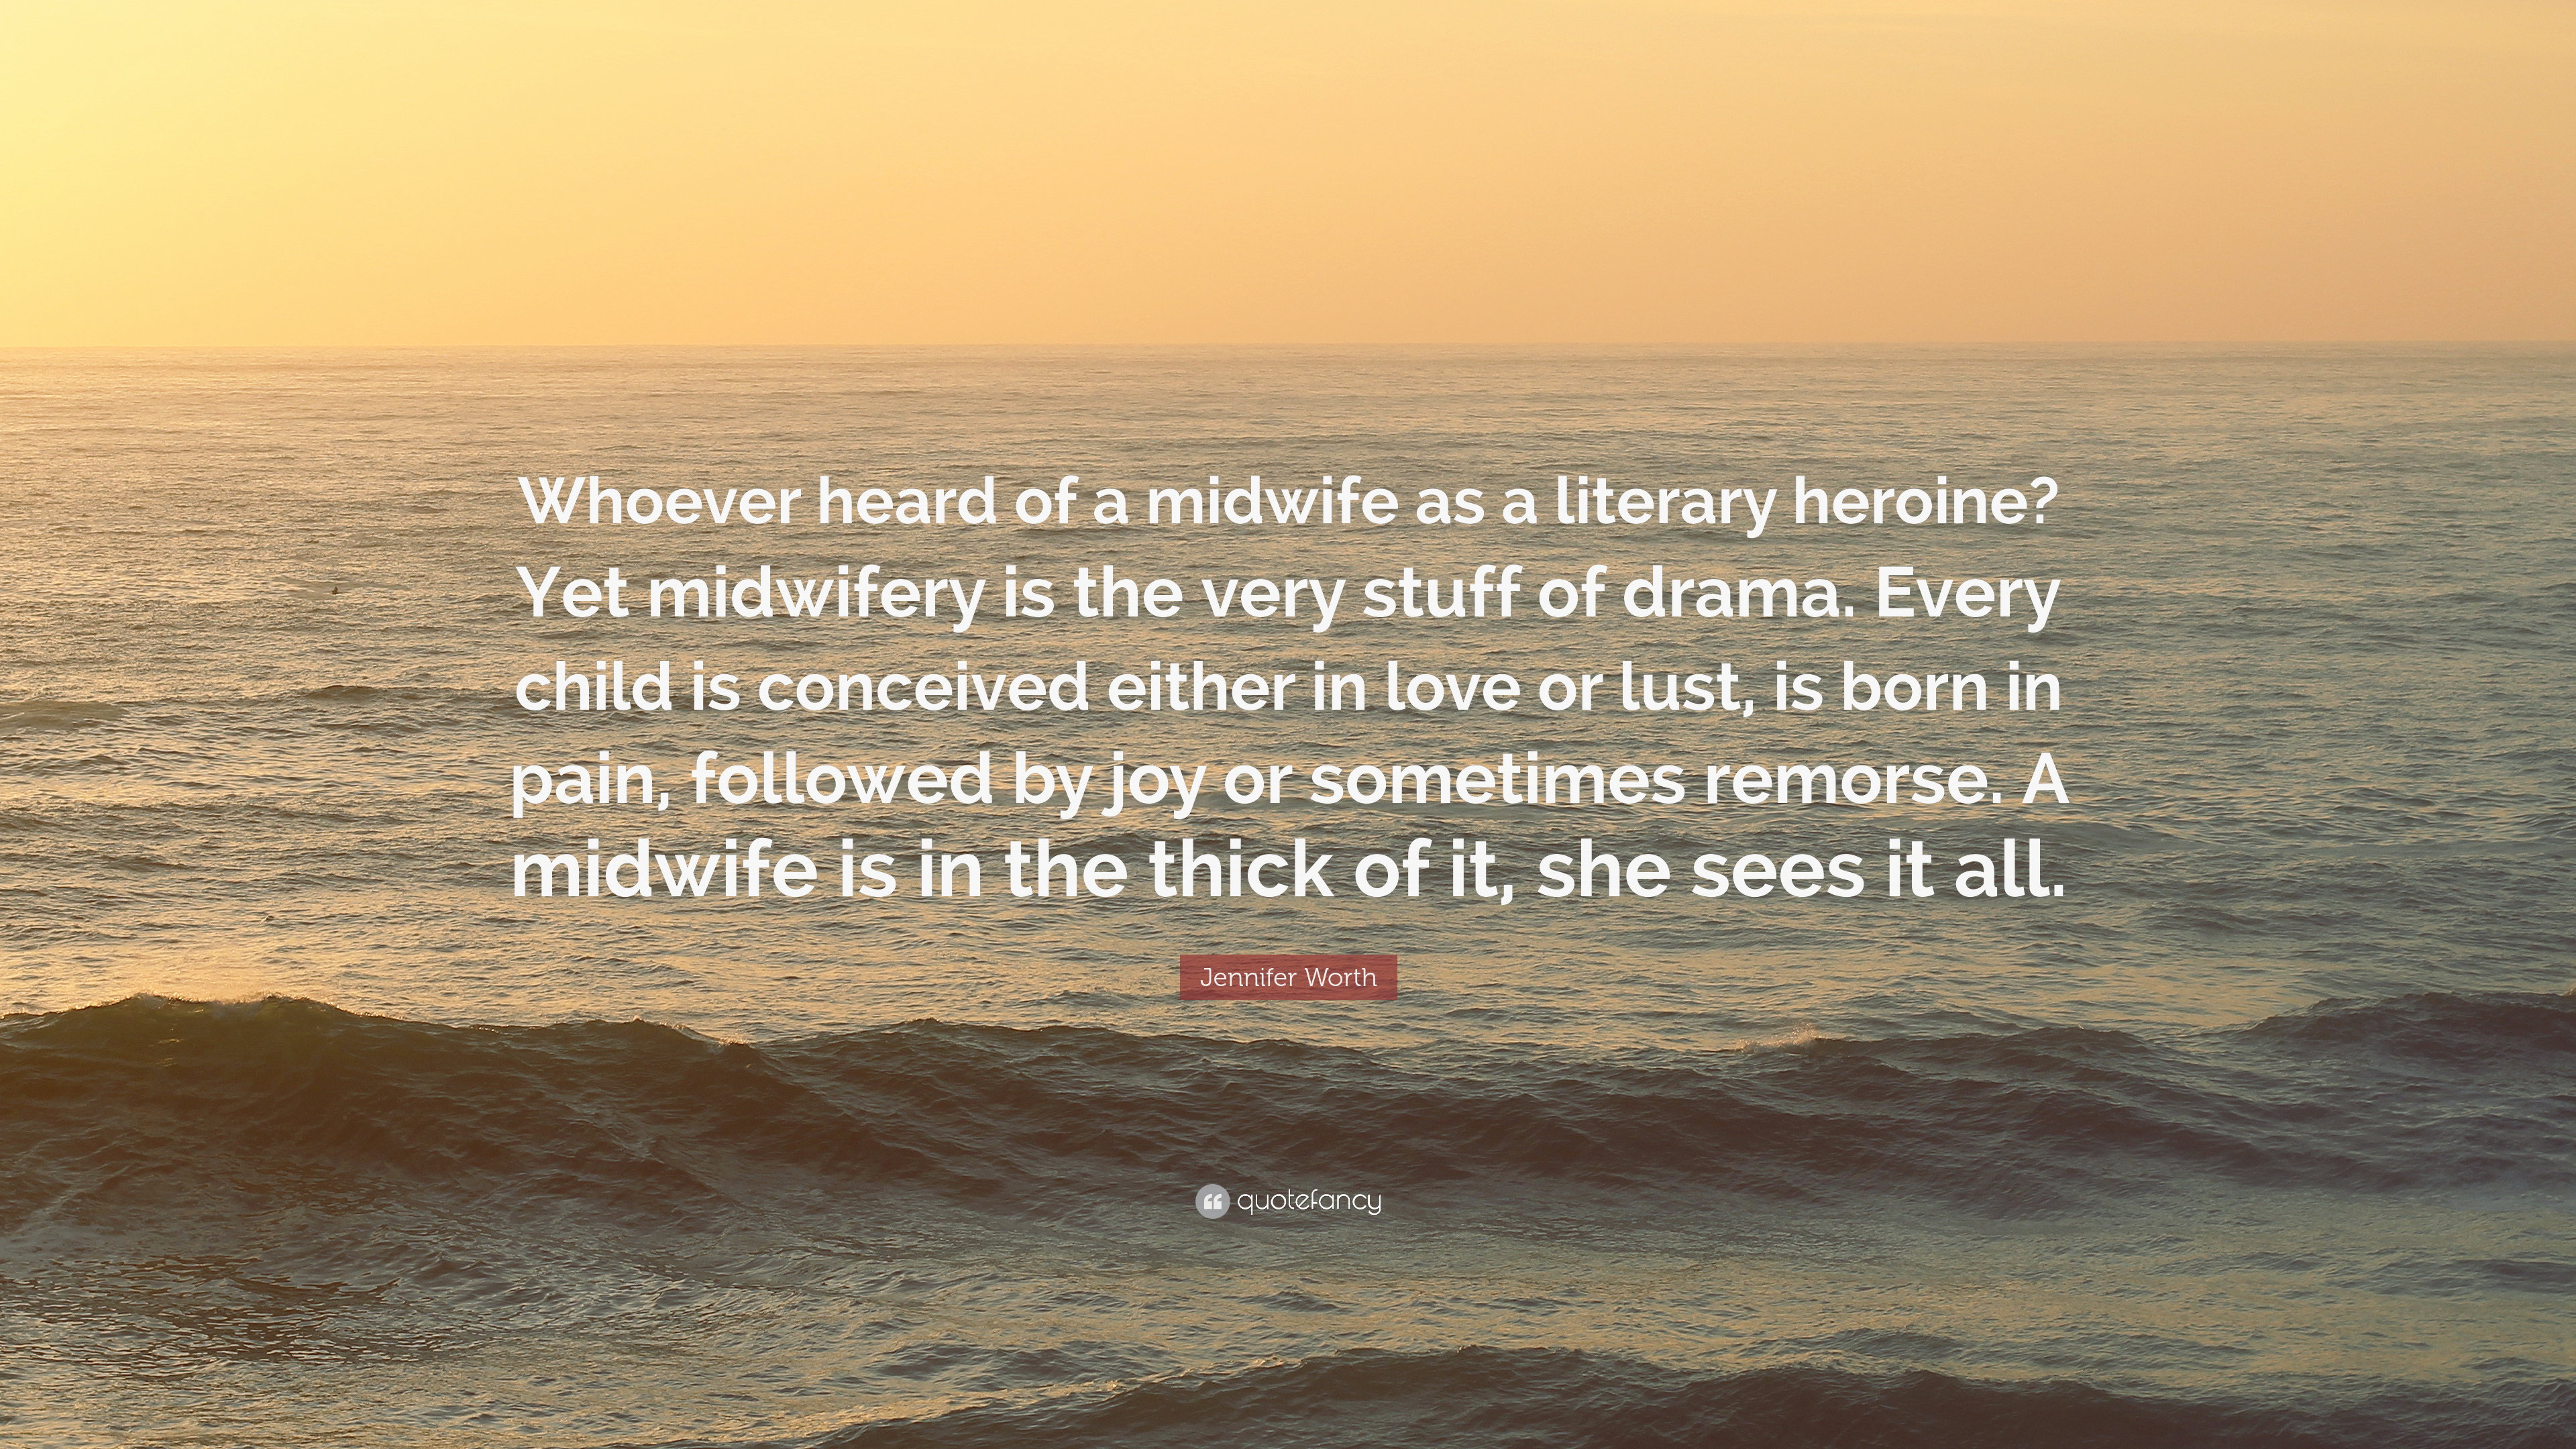 Jennifer Worth Quote: “Whoever heard of a midwife as a literary heroine? Yet midwifery is the very stuff of drama. Every child is conceived eit.”